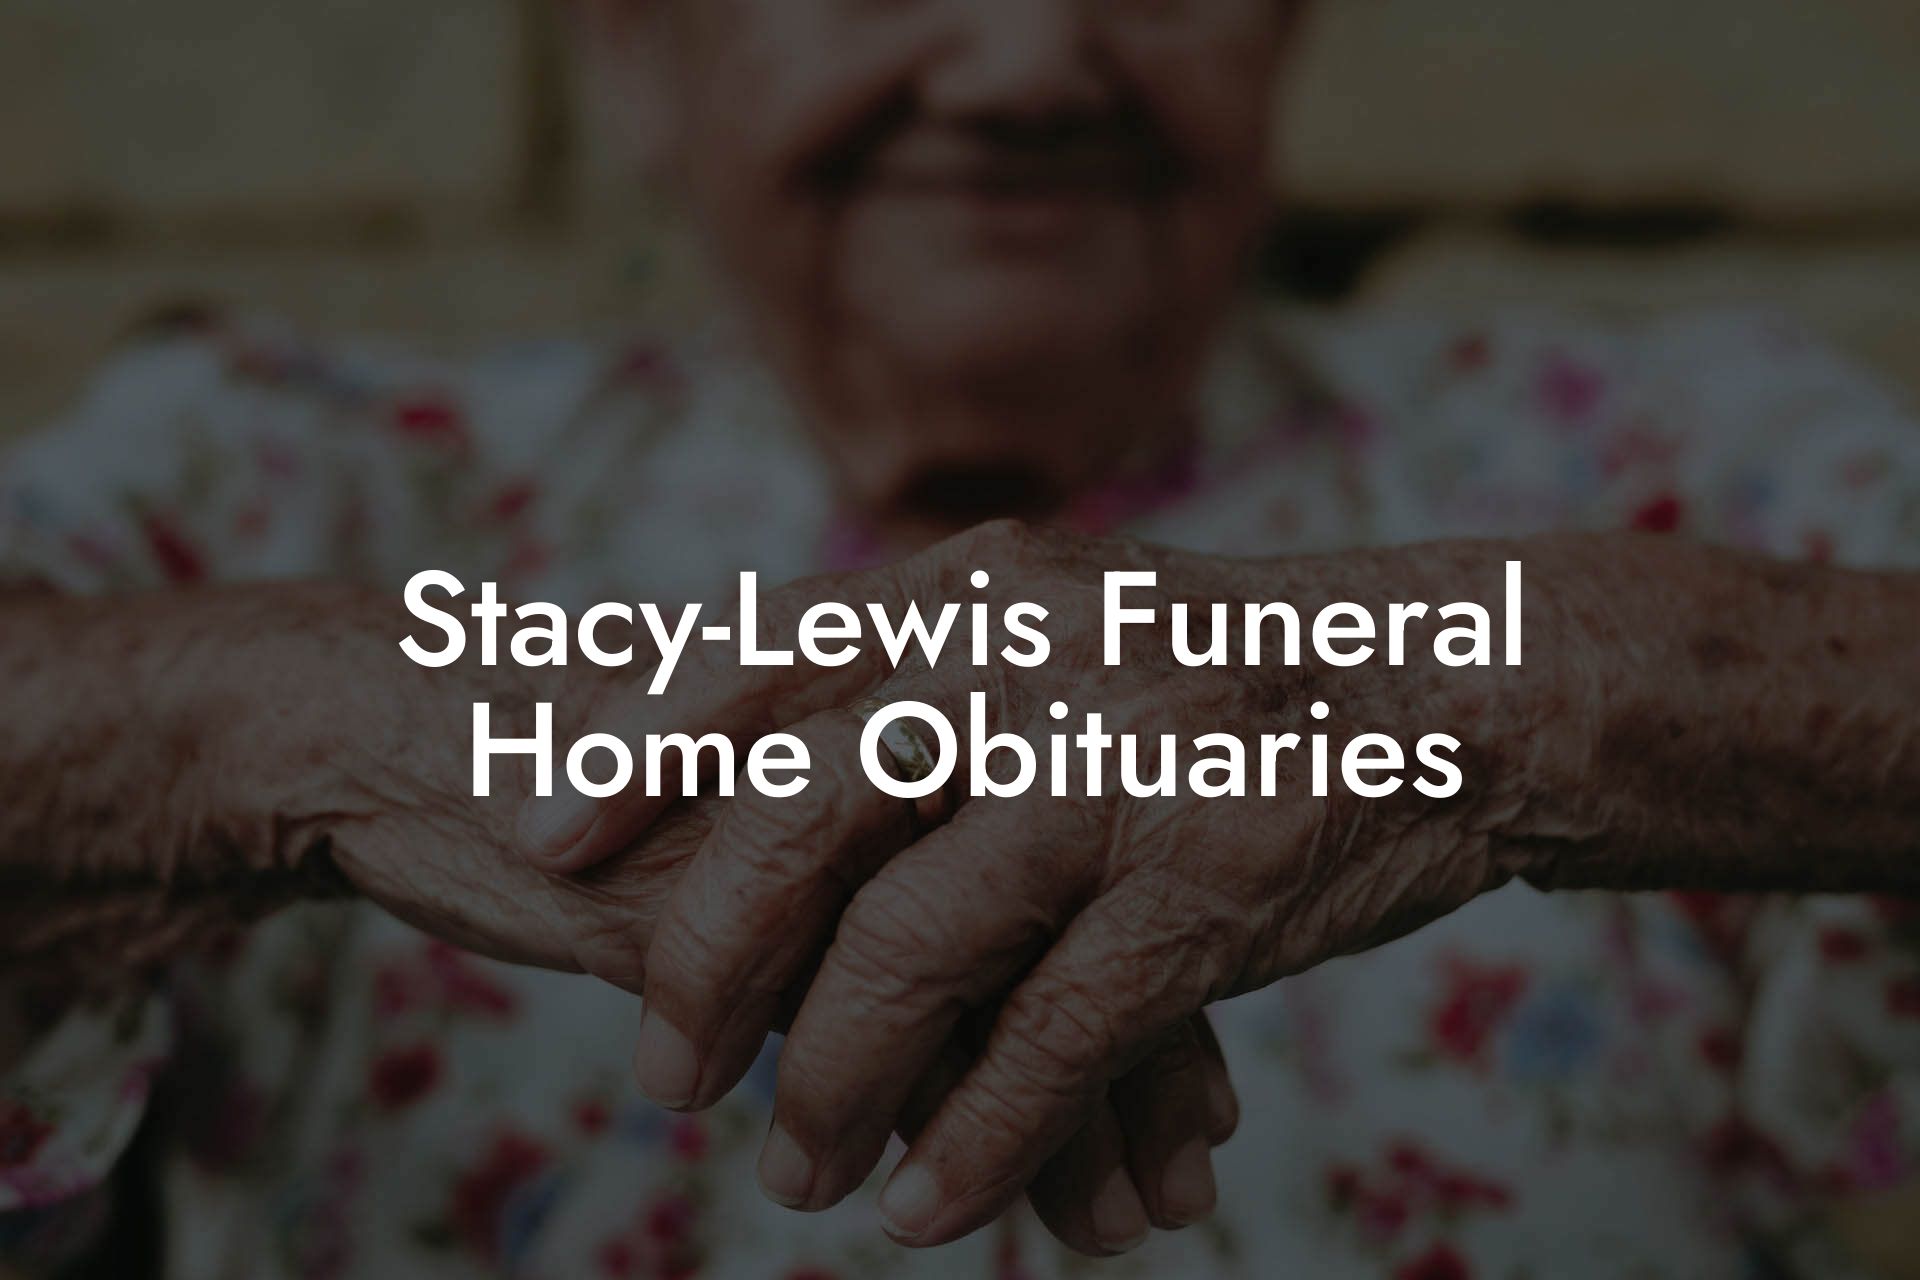 Stacy-Lewis Funeral Home Obituaries